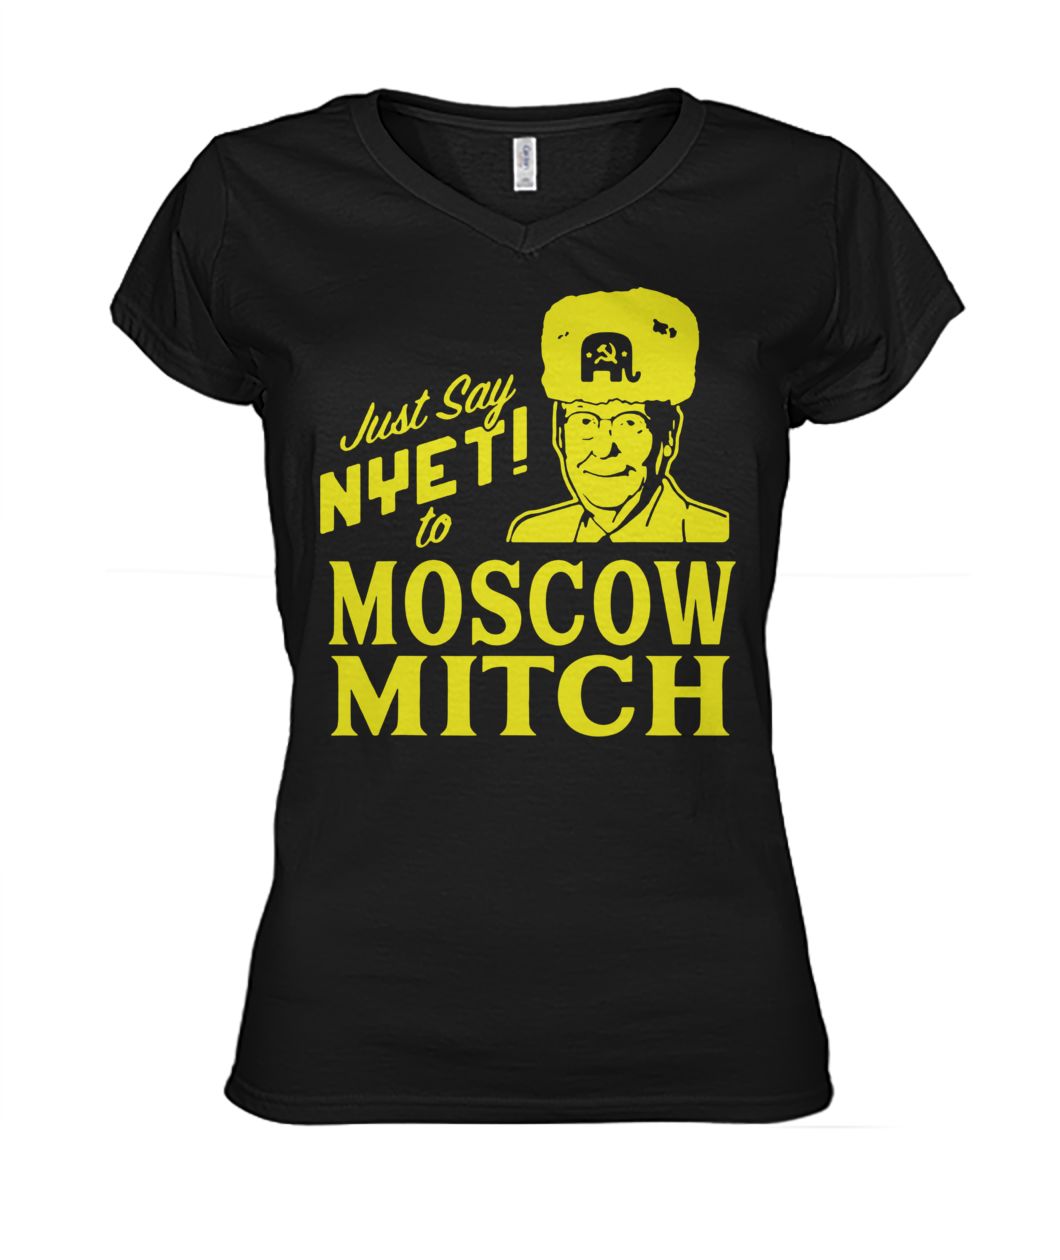 Mitch mcconnell just say nyet to moscow mitch women's v-neck